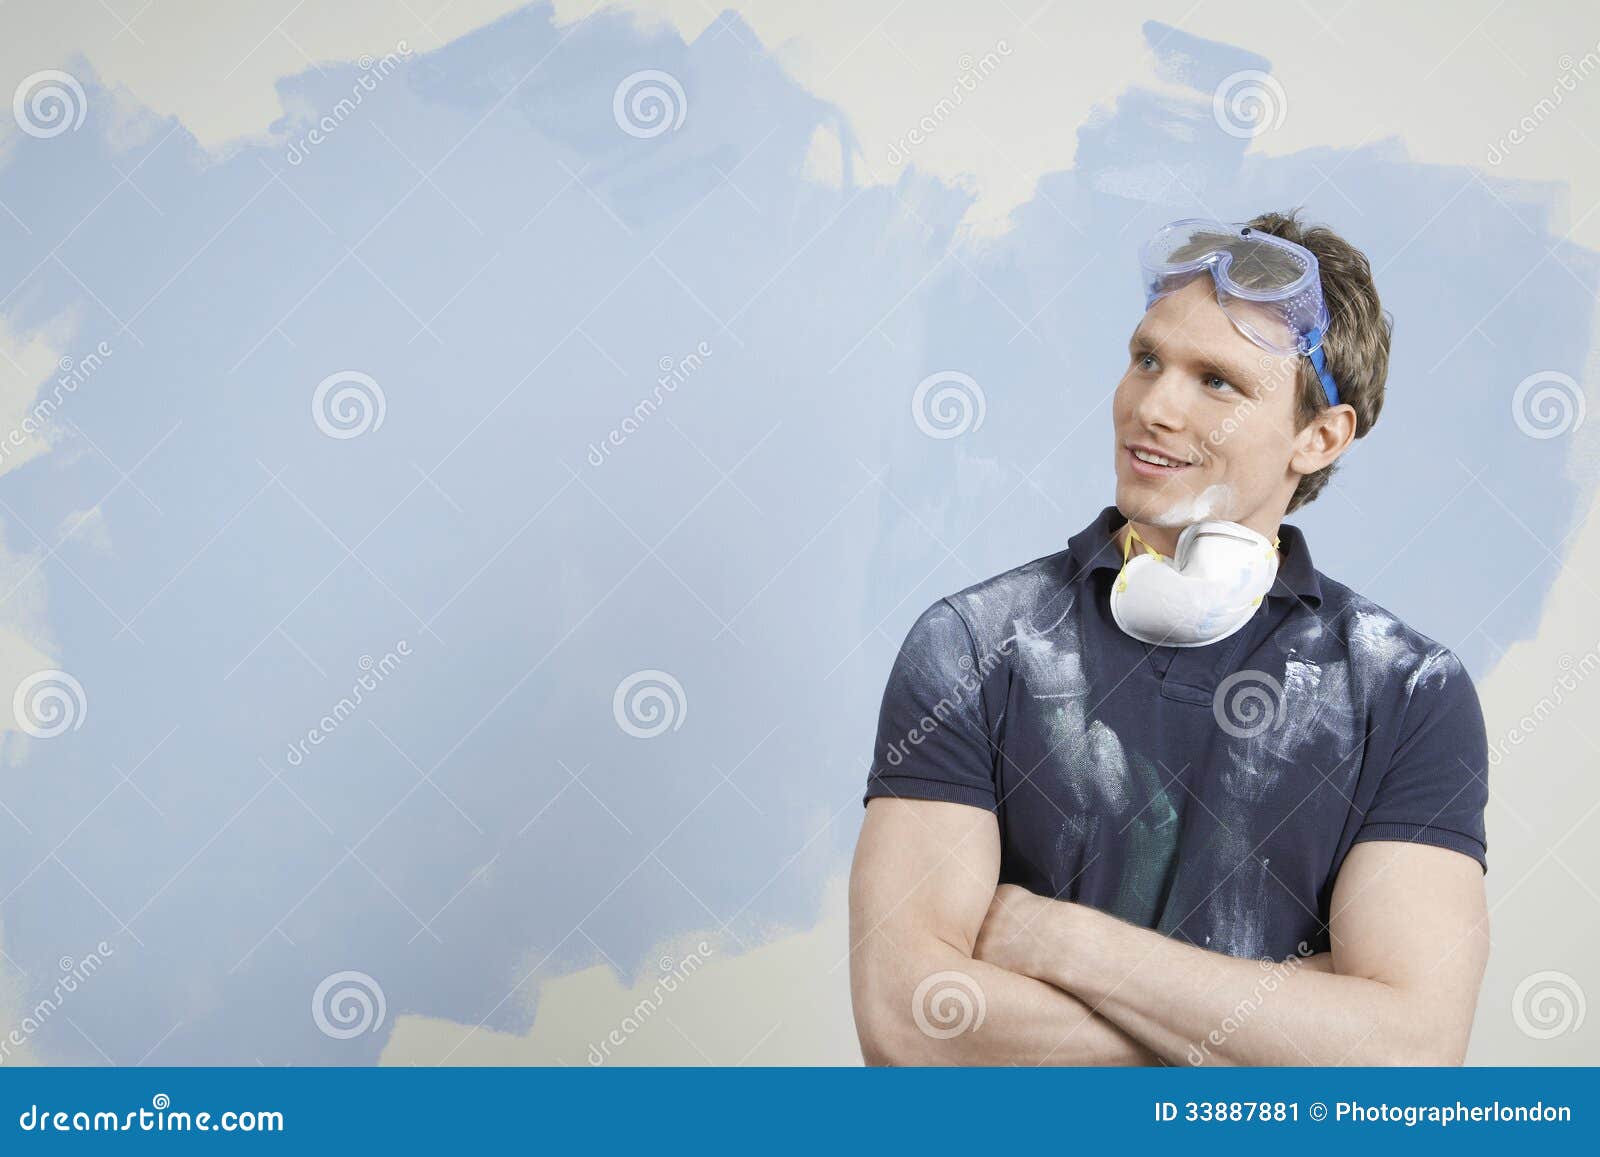 man with arms crossed against incomplete painted wall